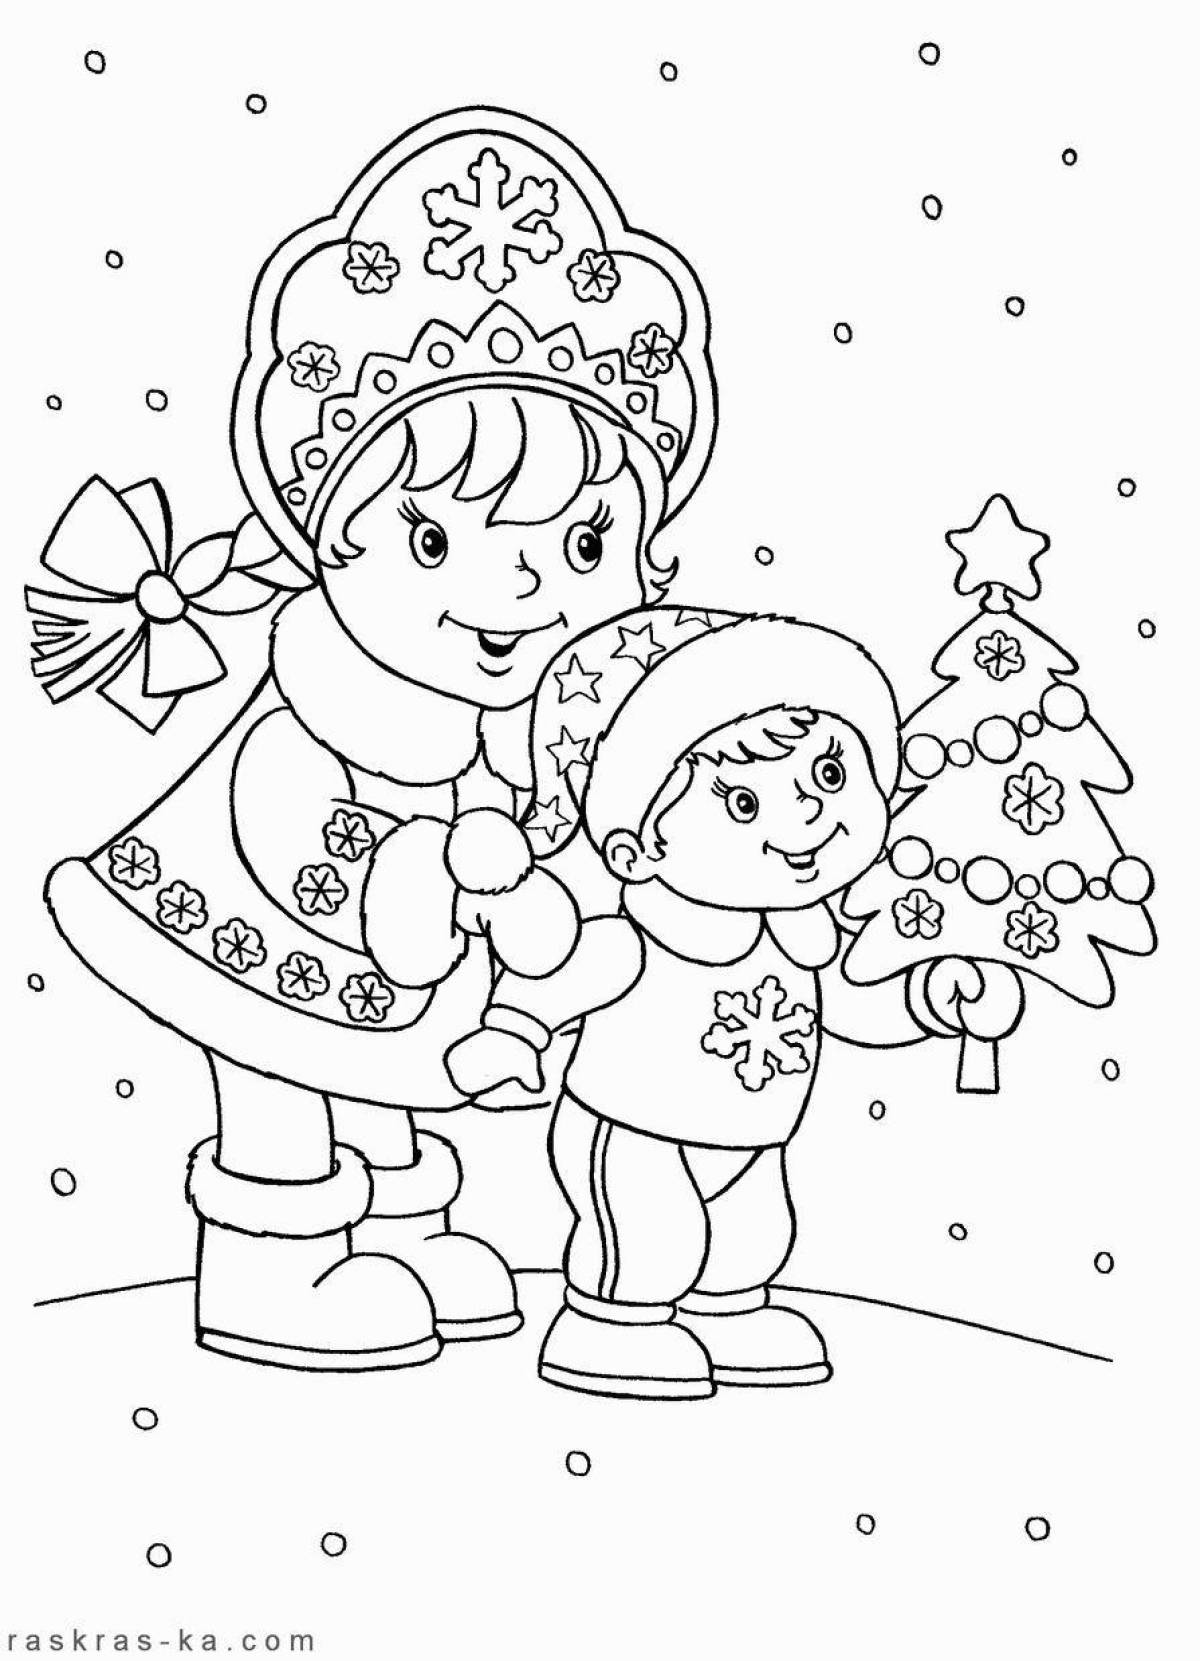 Exciting snow maiden coloring book